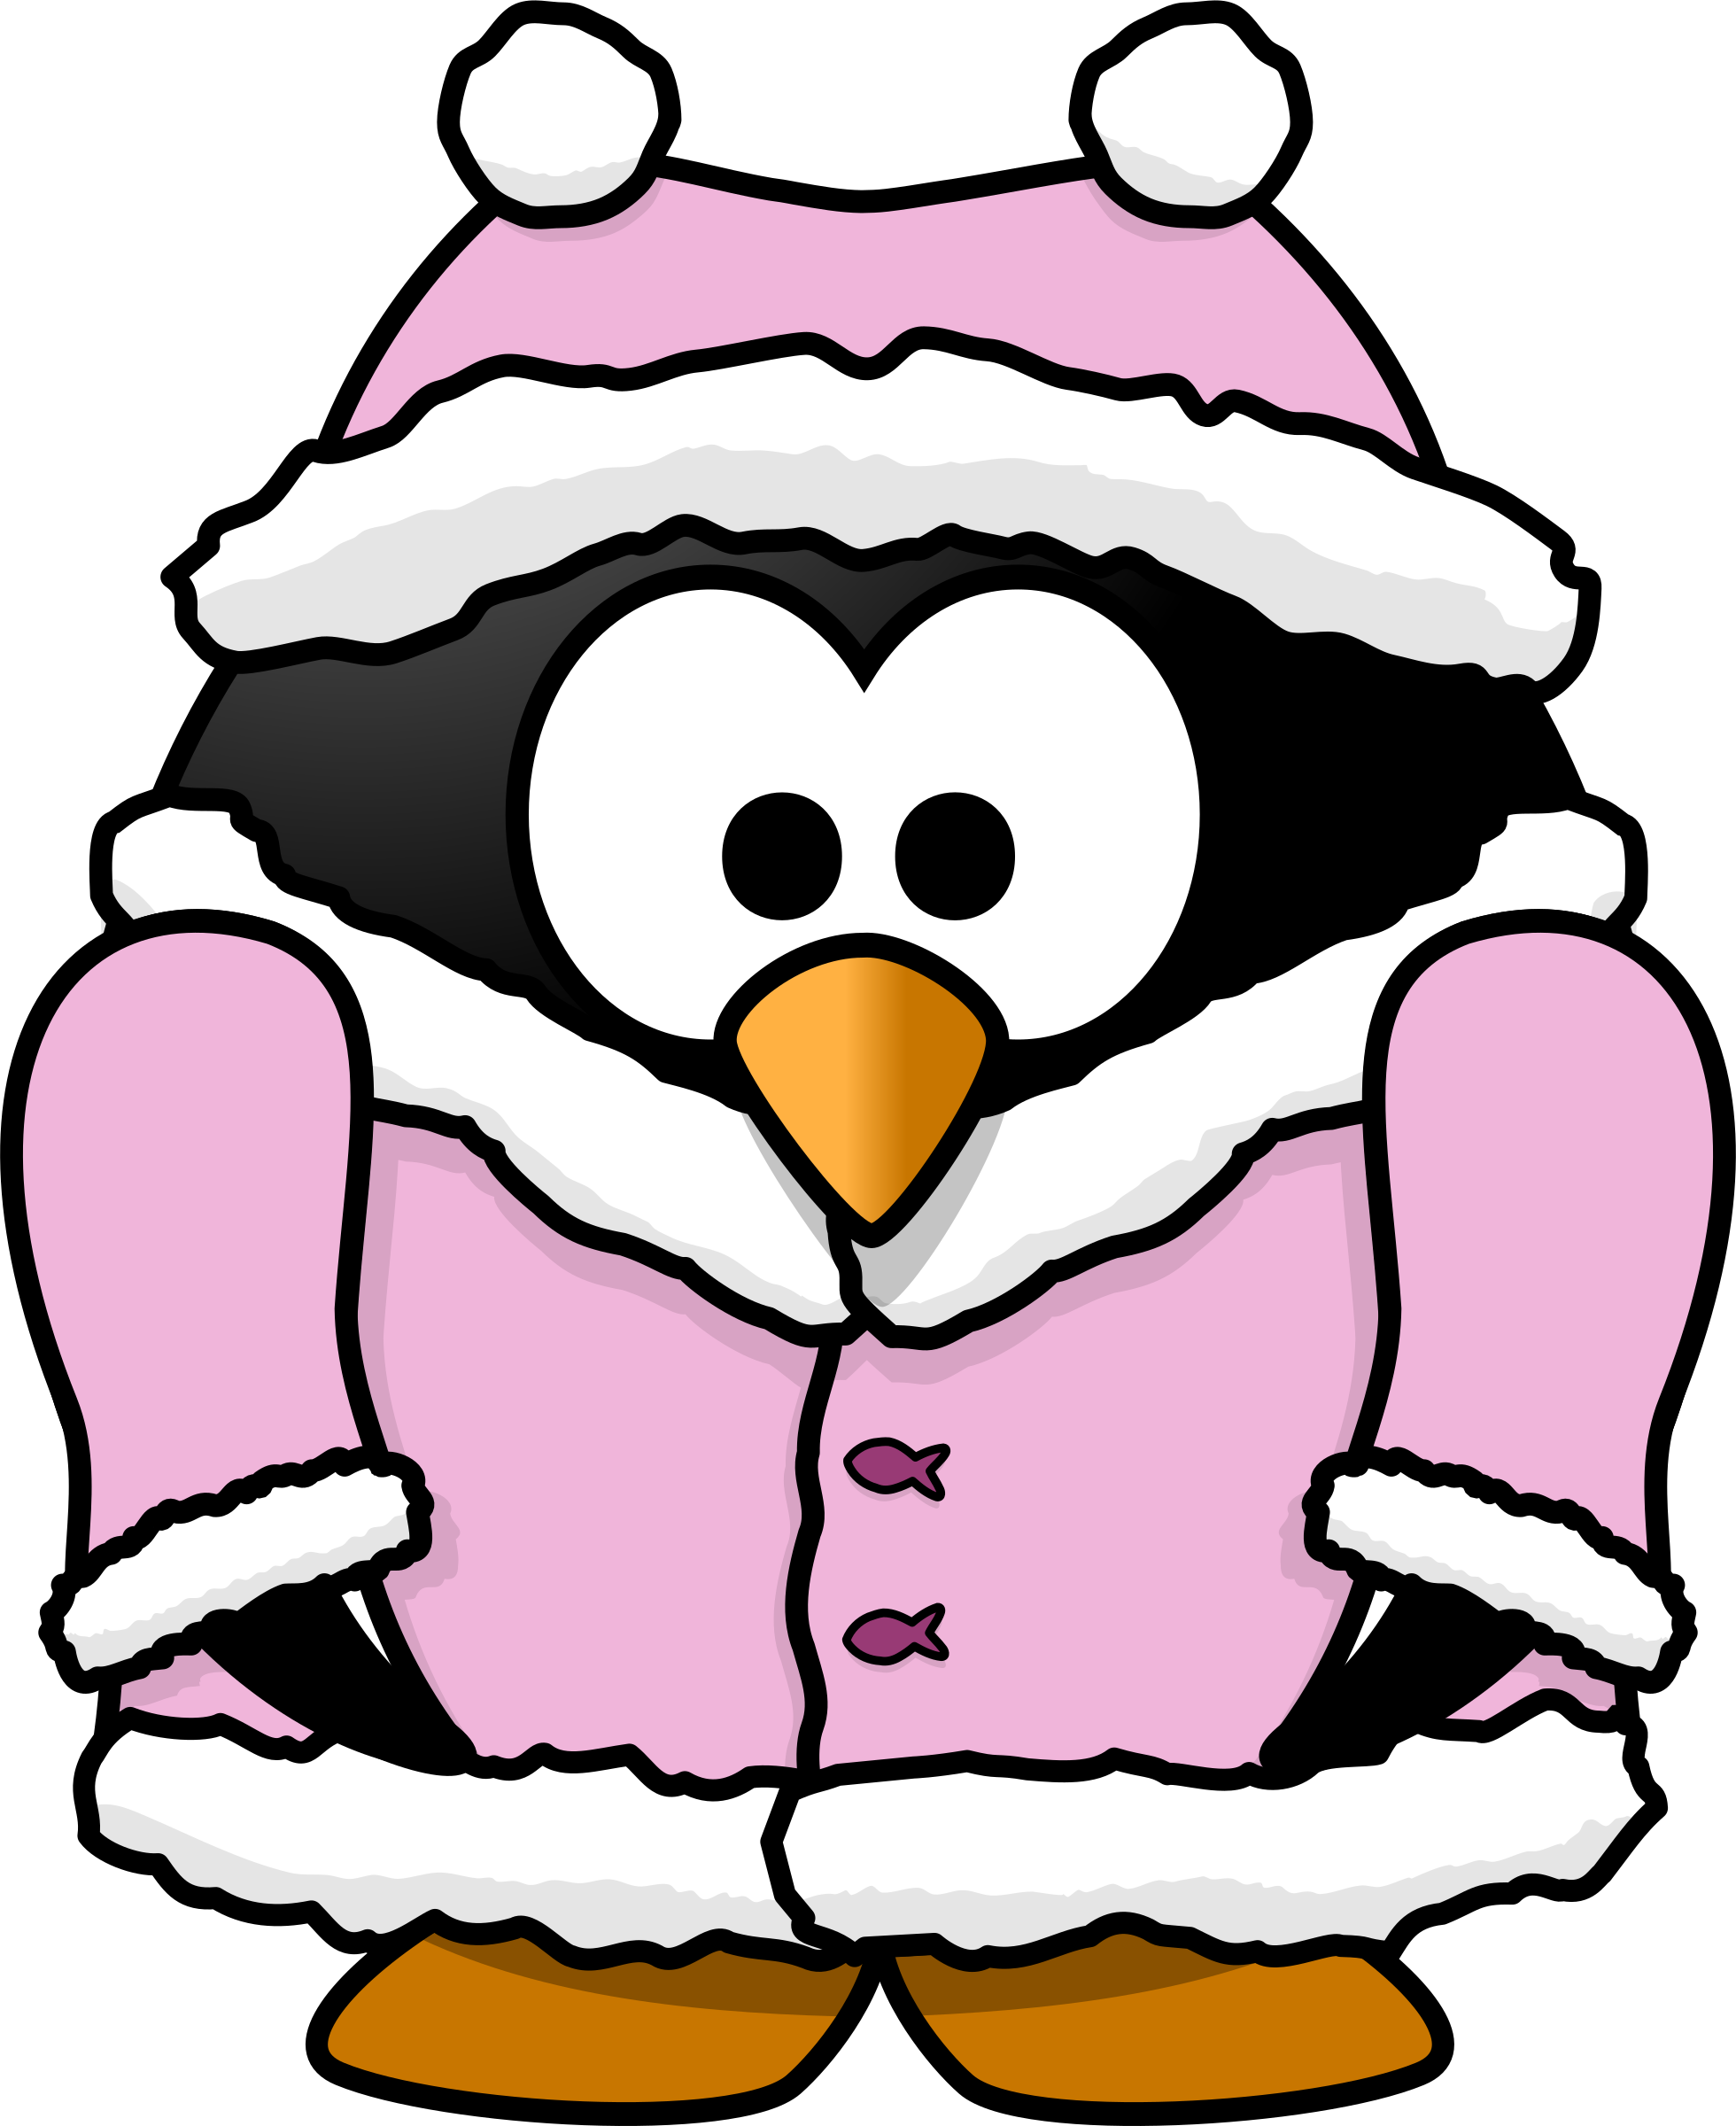 Wednesday clipart winter. Penguin chick big image